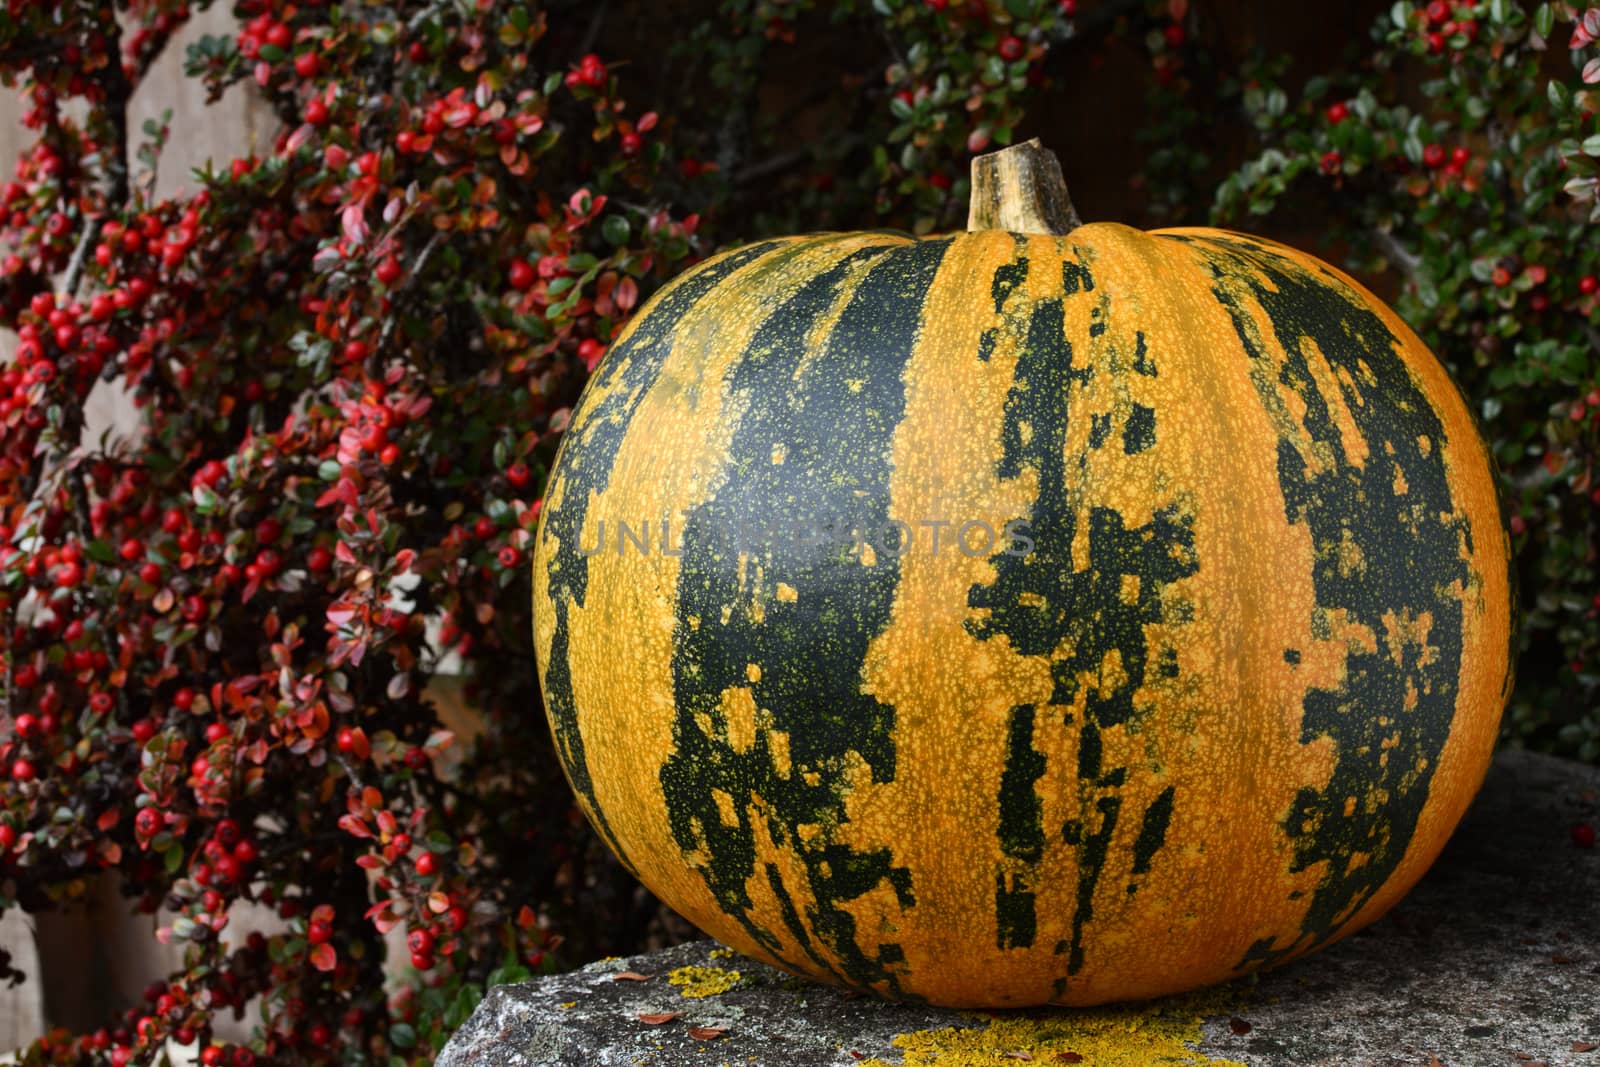 Large pumpkin with bold green and yellow stripes, surrounded by autumn cotoneaster berries